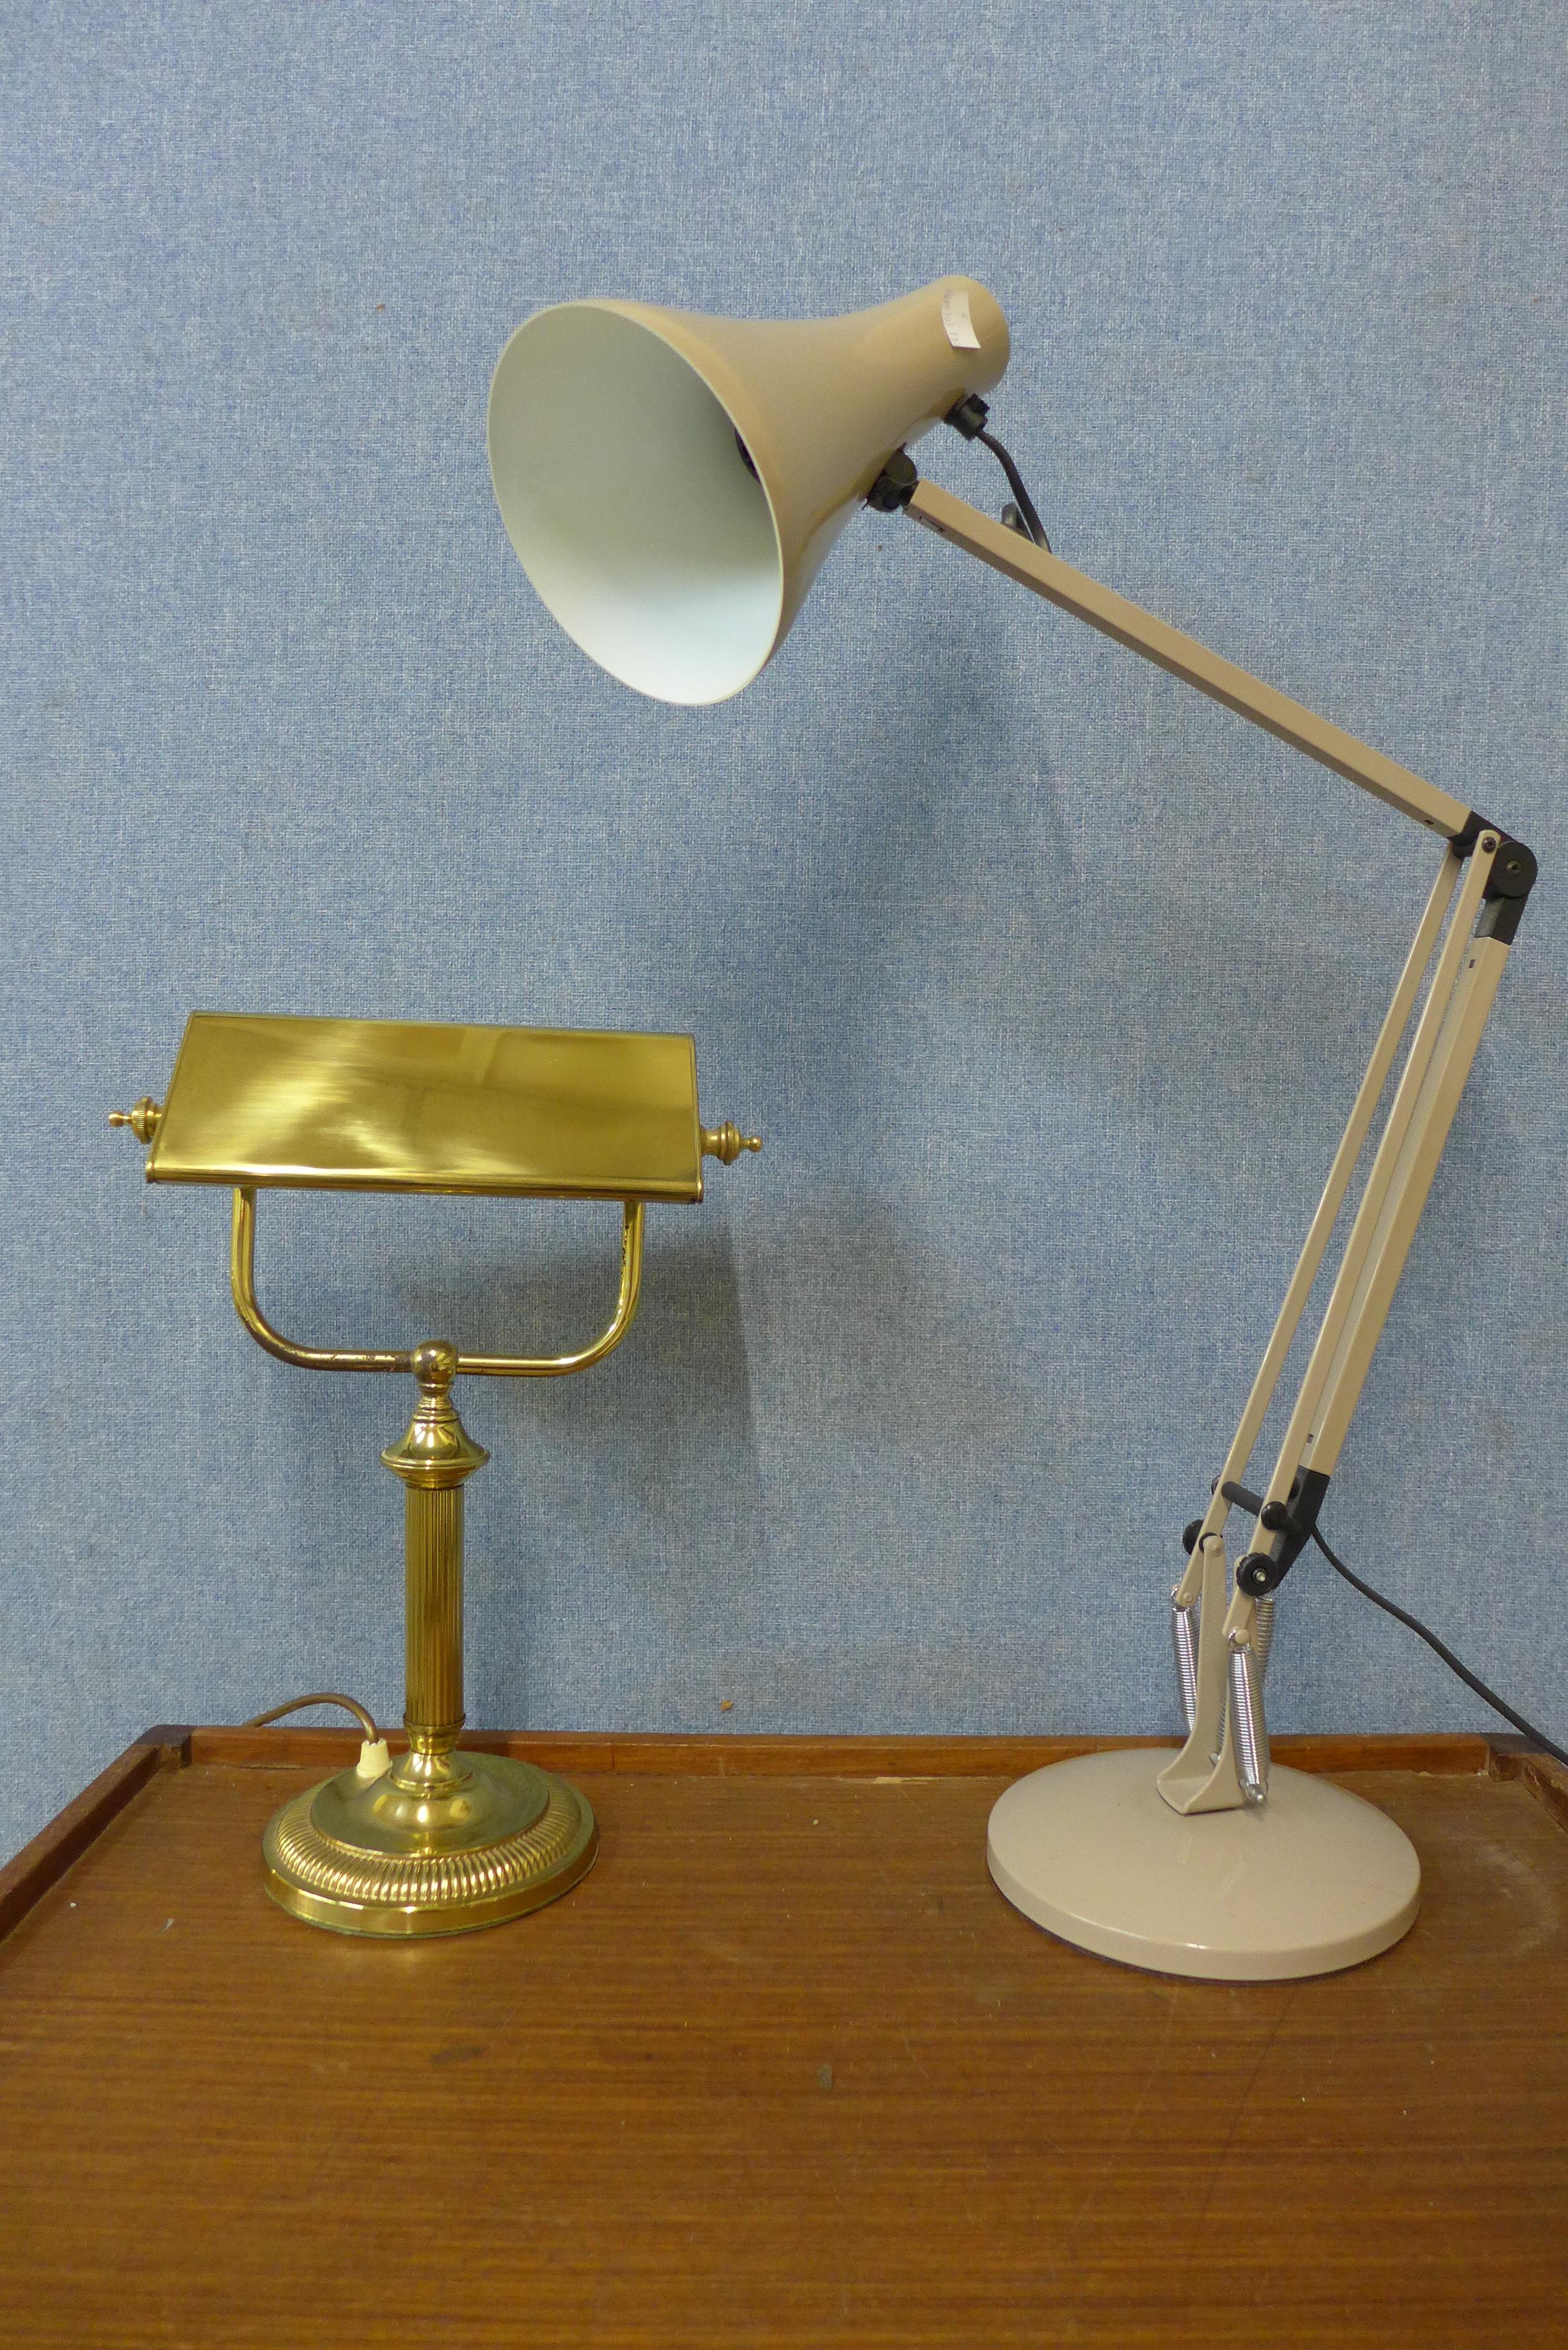 A taupe metal anglepoise desk lamp and a brass student's desk lamp